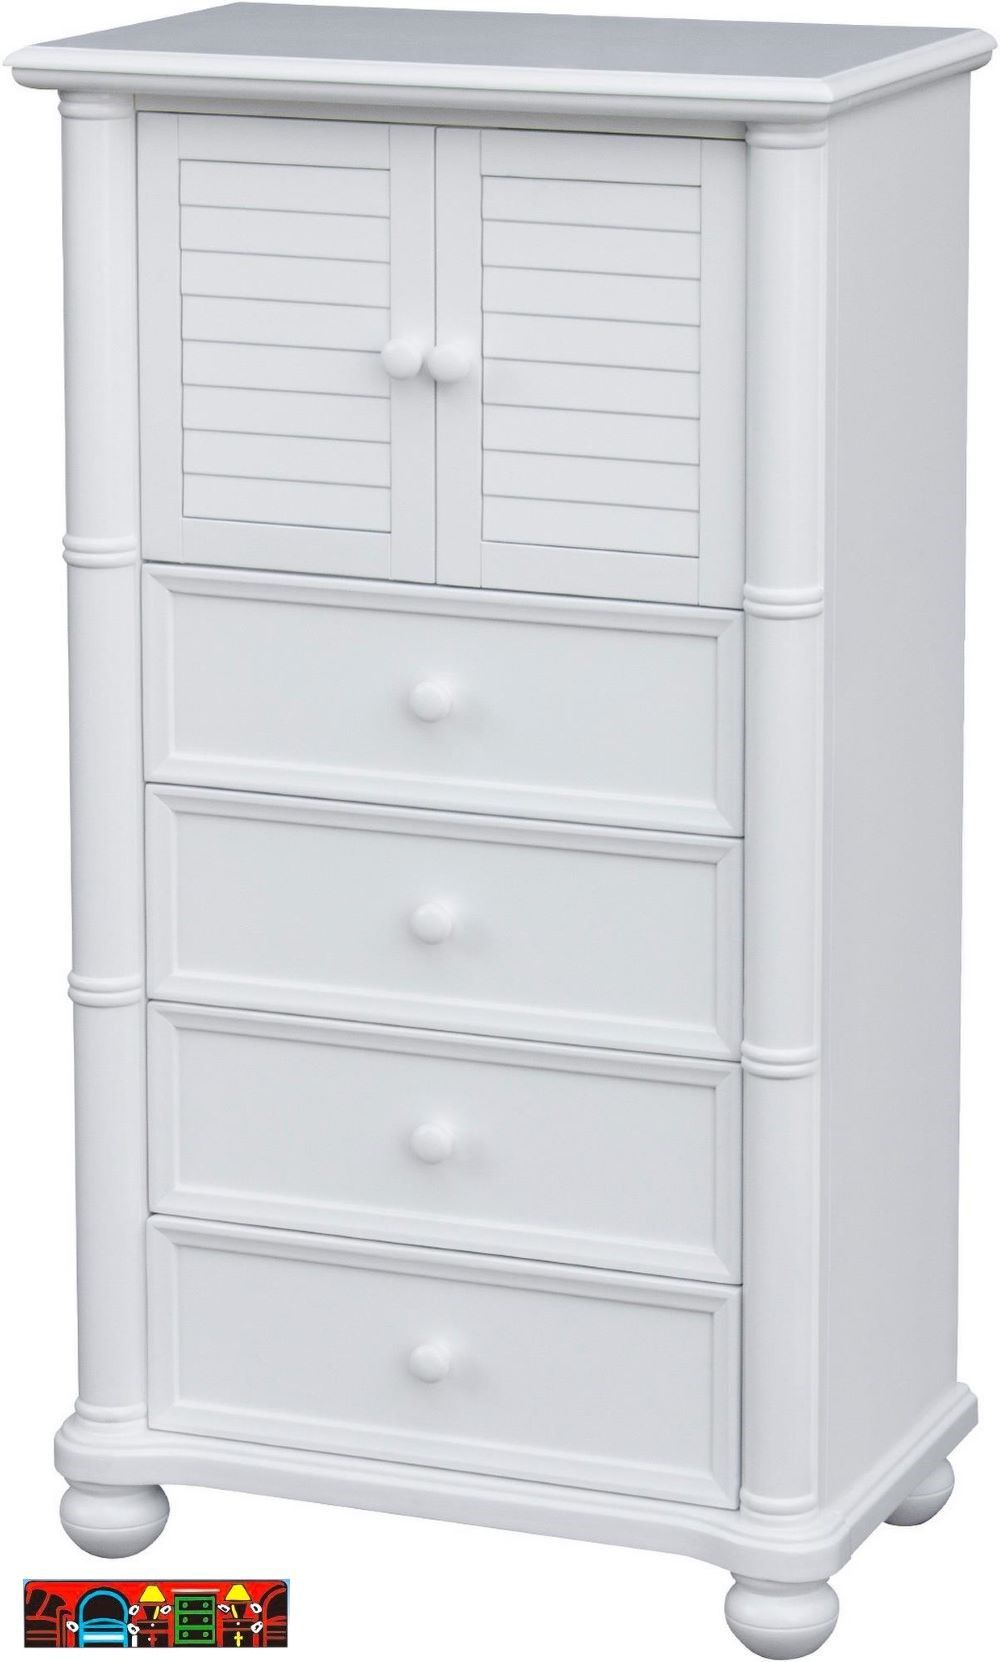 Beachfront Gentemans Chest / Lingerie Chest, crafted from solid wood, featuring a white finish. Available at Bratz-CFW in Fort Myers FL